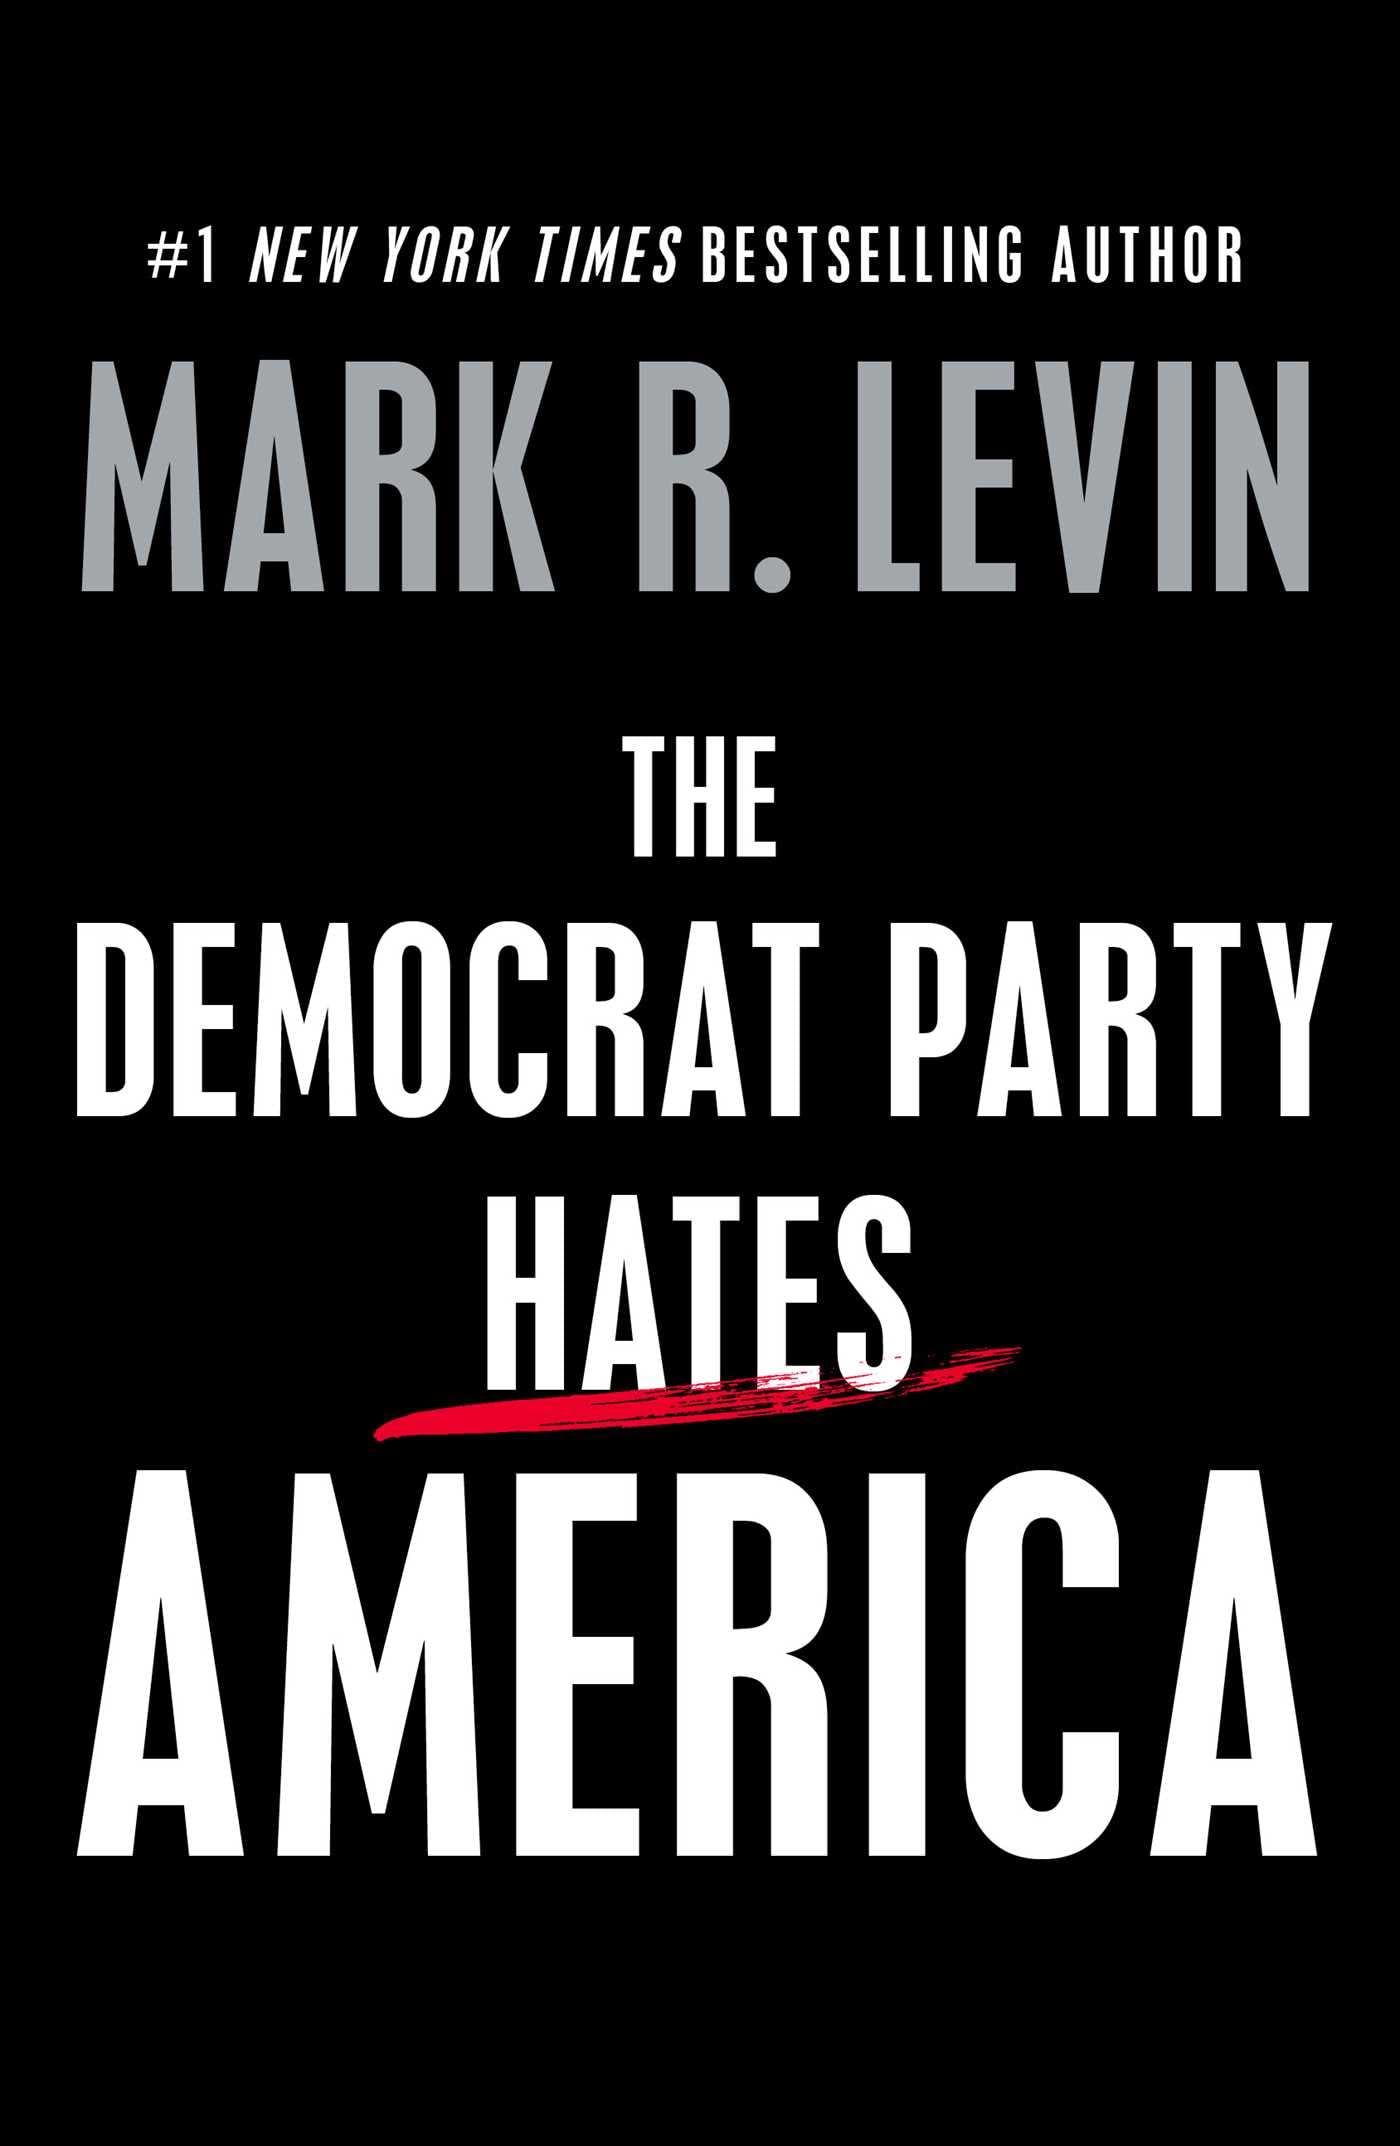 Image for "The Democrat Party Hates America"